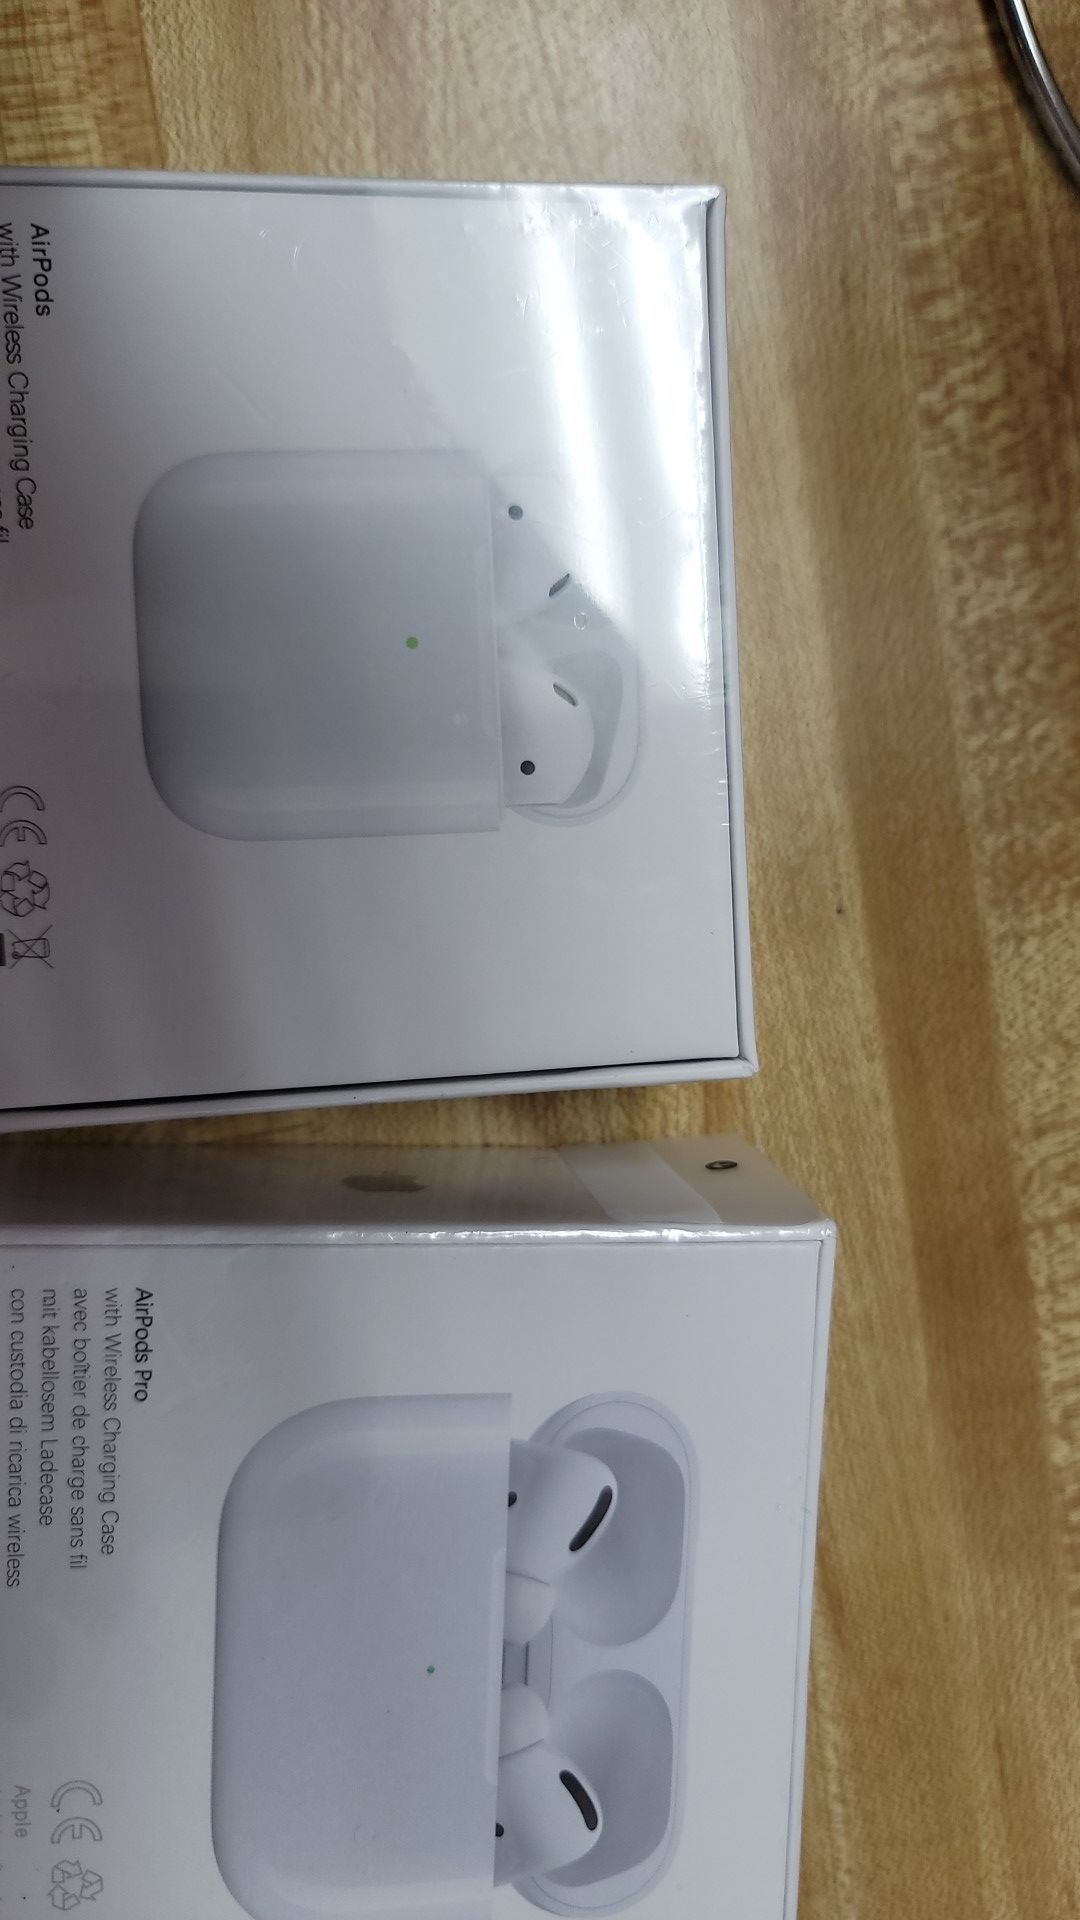 Air pod's 2nd generation an Pro's new in the box plastic cover